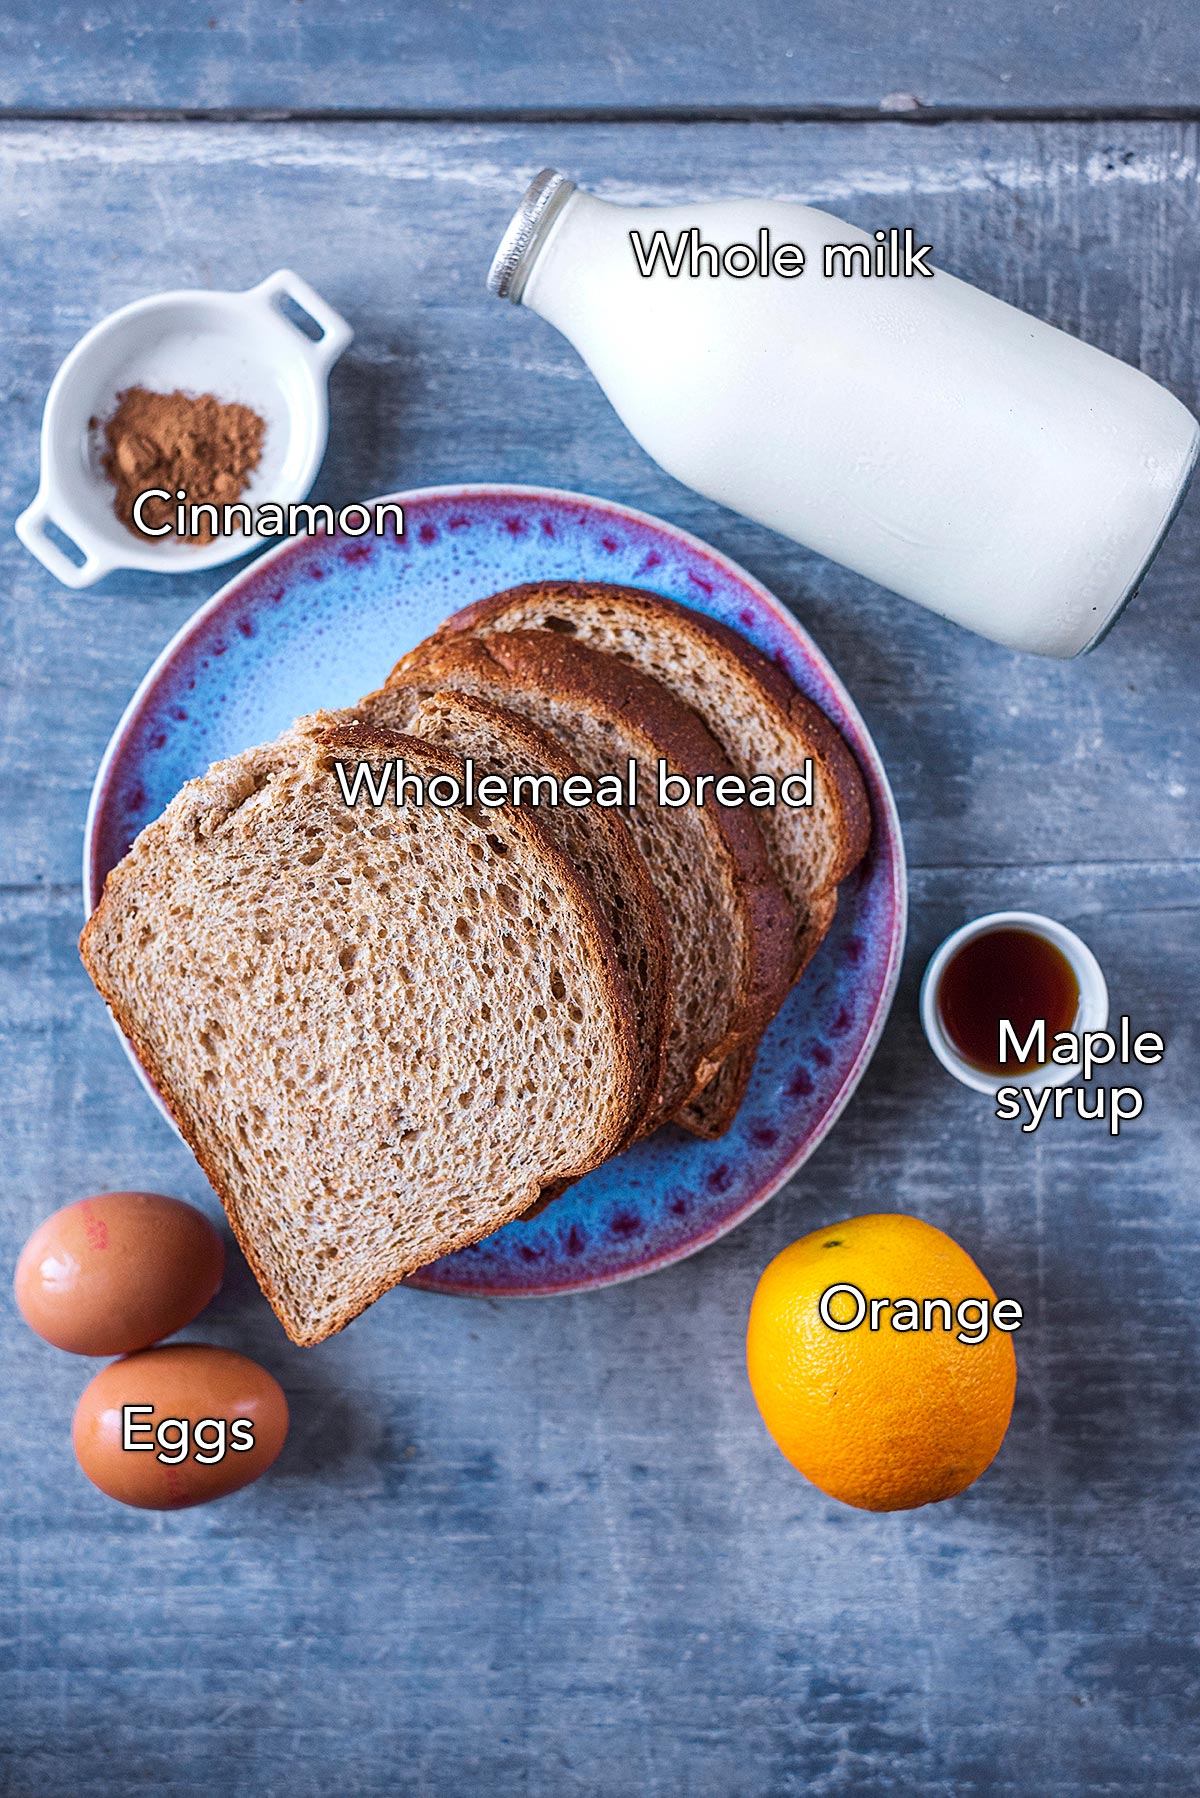 Four slices of bread on a plate surrounded by a bottle of milk, two eggs, an orange, some maple syrup and some spices